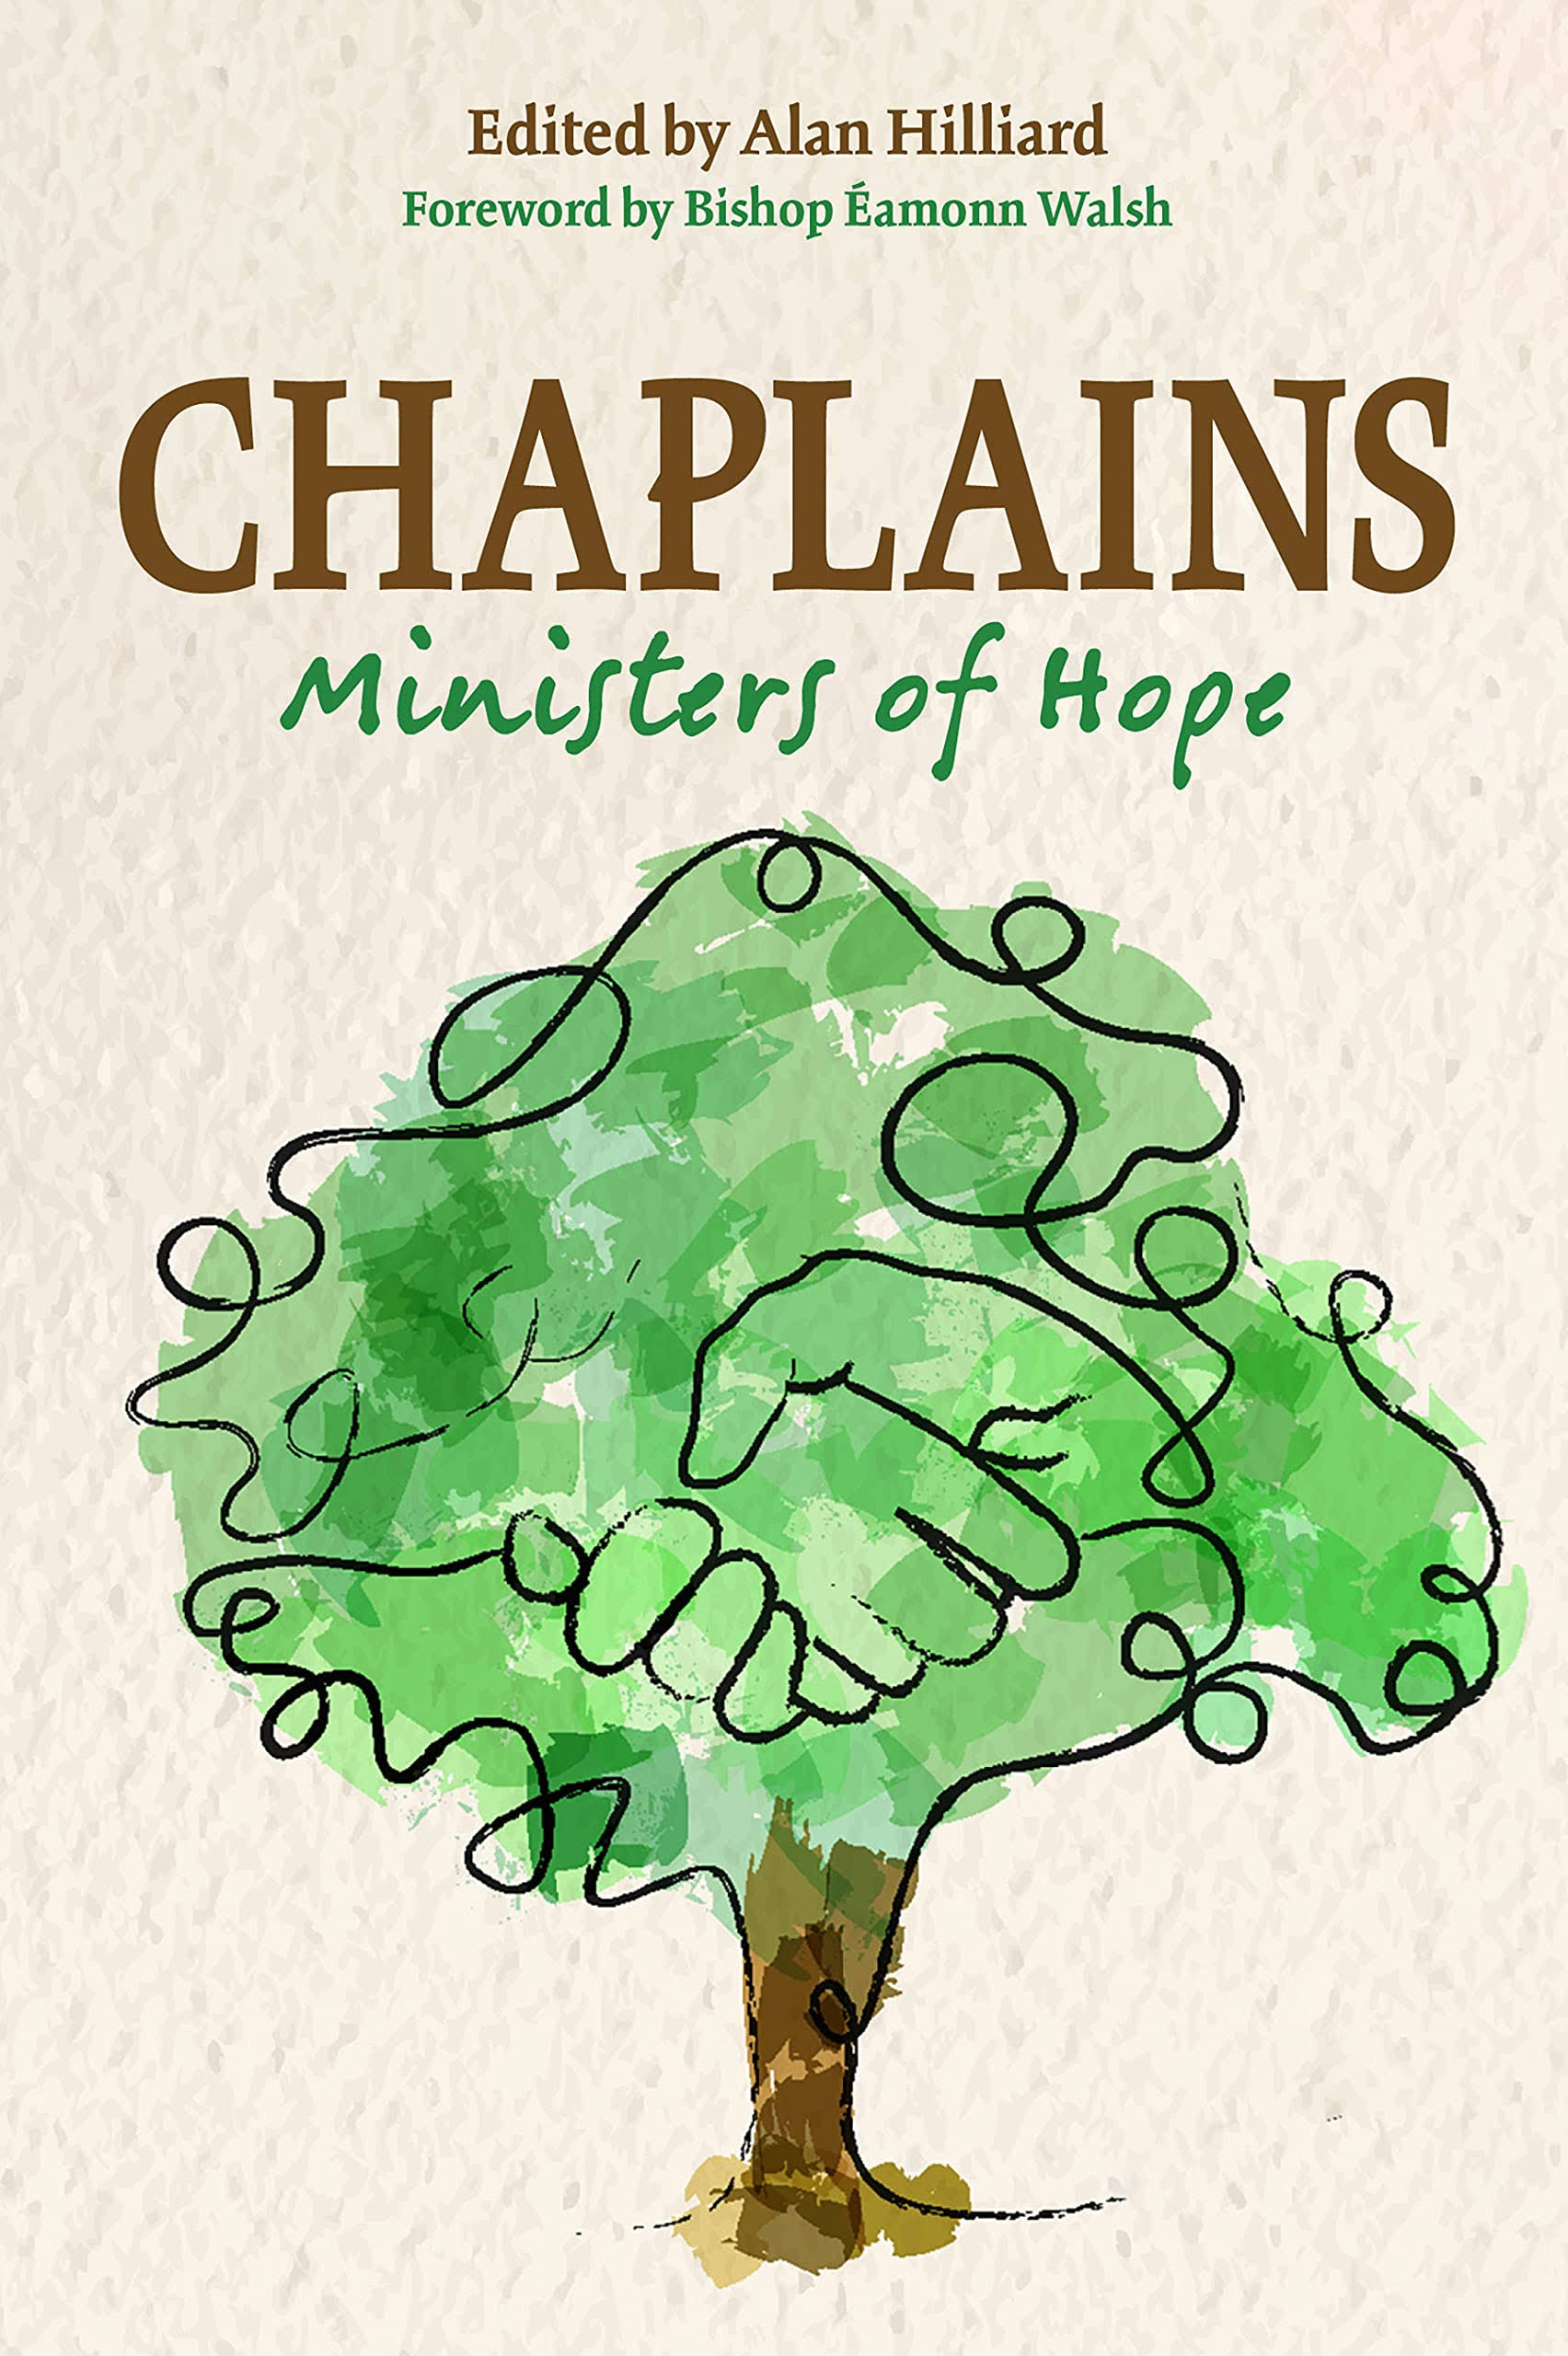 Chaplains: Ministers of Hope [Book]